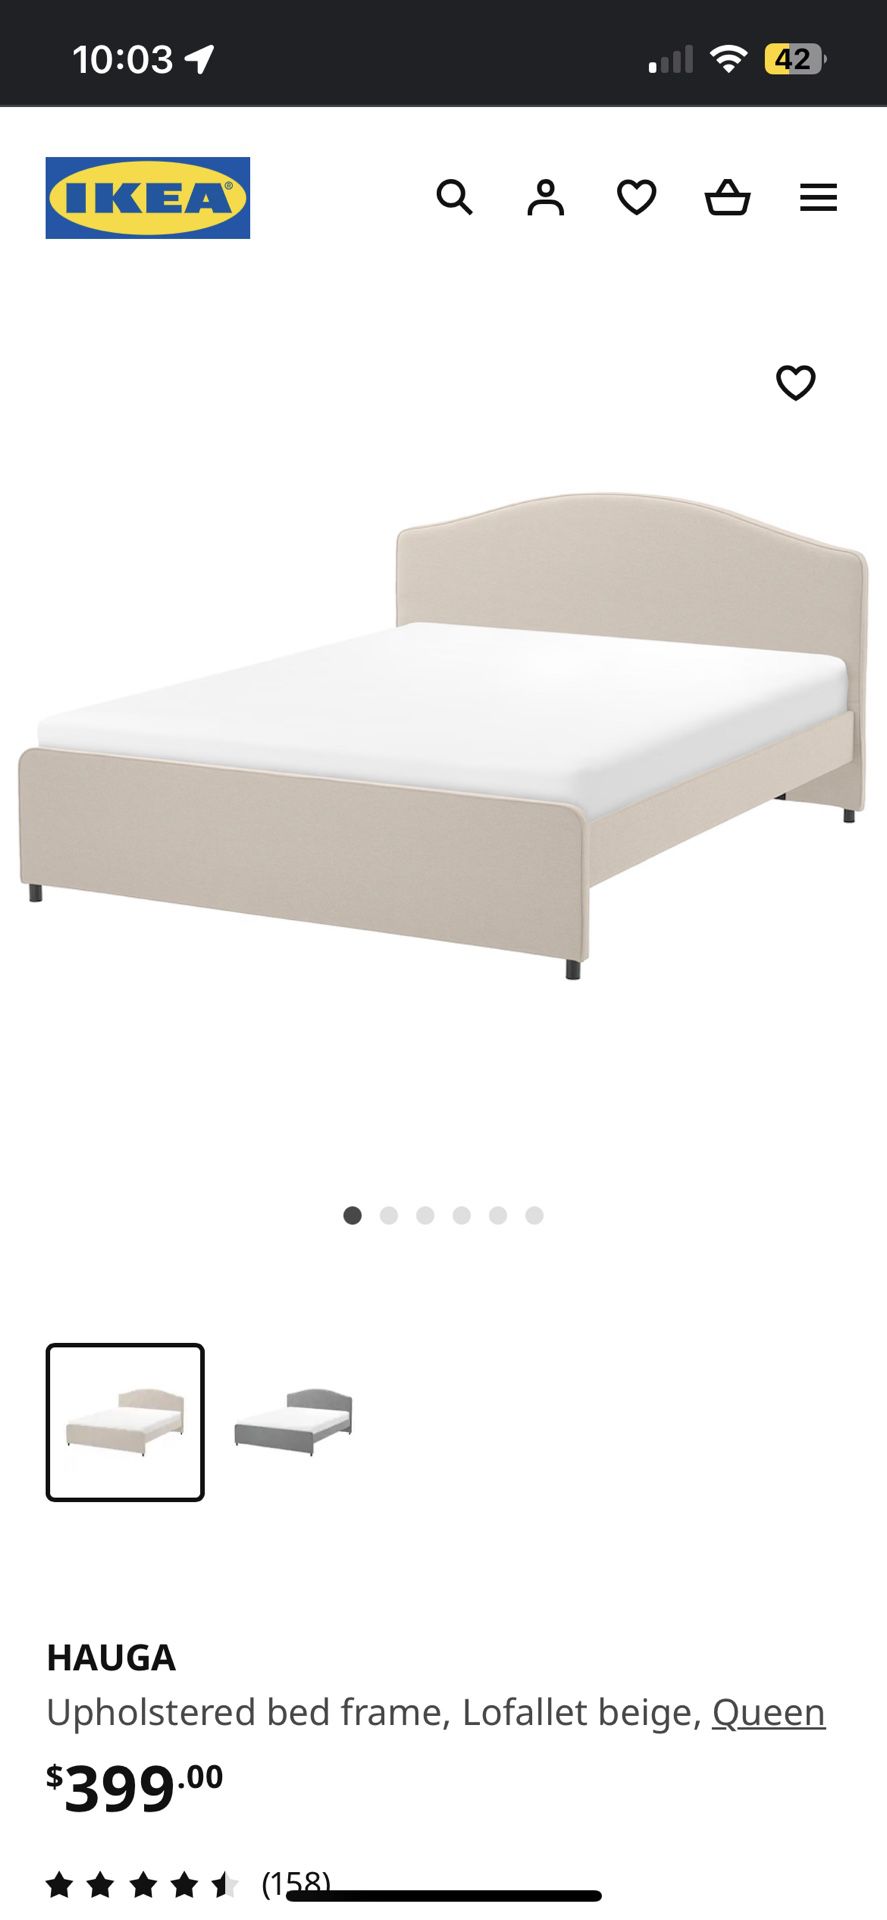 IKEA queen Size Bed Frame 